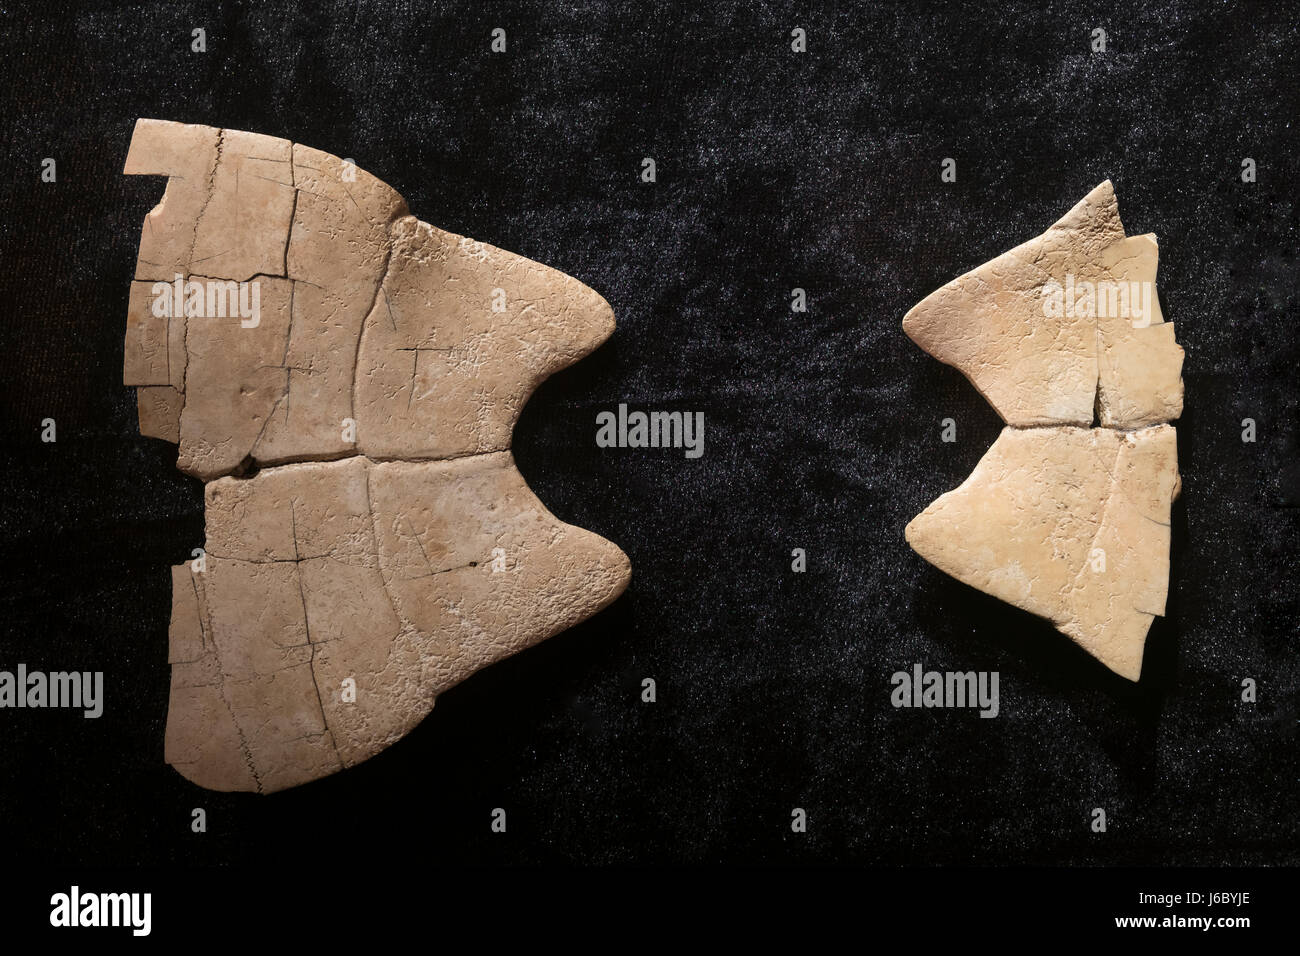 Oracle bone carved with characters. Late Shang Dynasty (13th century B.C.E - mid. 11th century B.C.E) Discovered in Yin relic in Anyang, Henan. Stock Photo